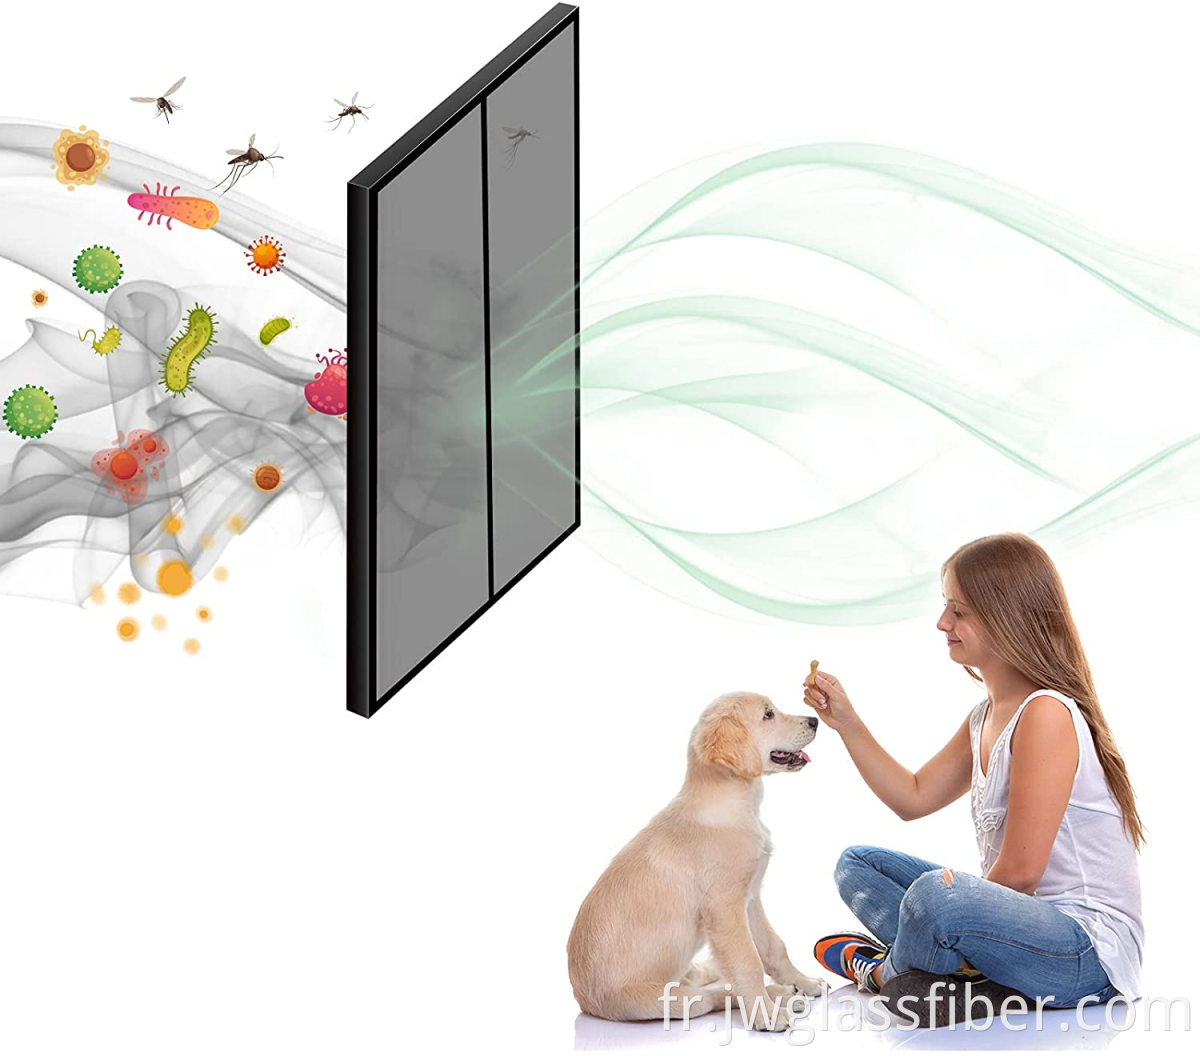 Polyester Fly Bug Screen Mesh Insect Screen Mosquito Door Net